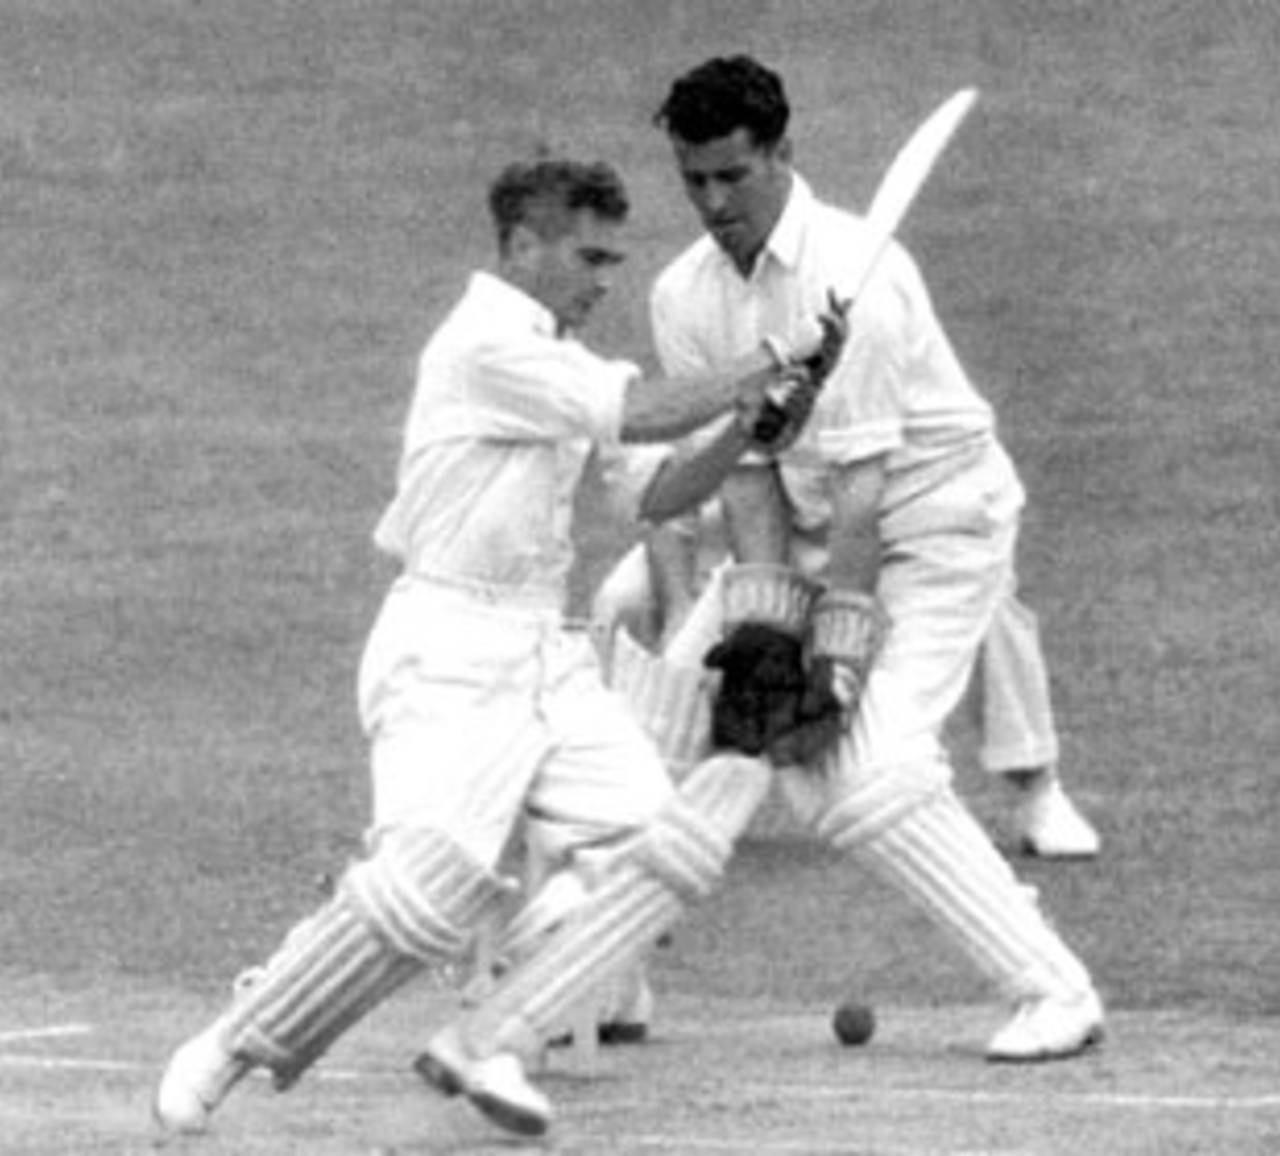 Tony Pawson goes for a pull, Kent v Middlesex, August 10, 1950